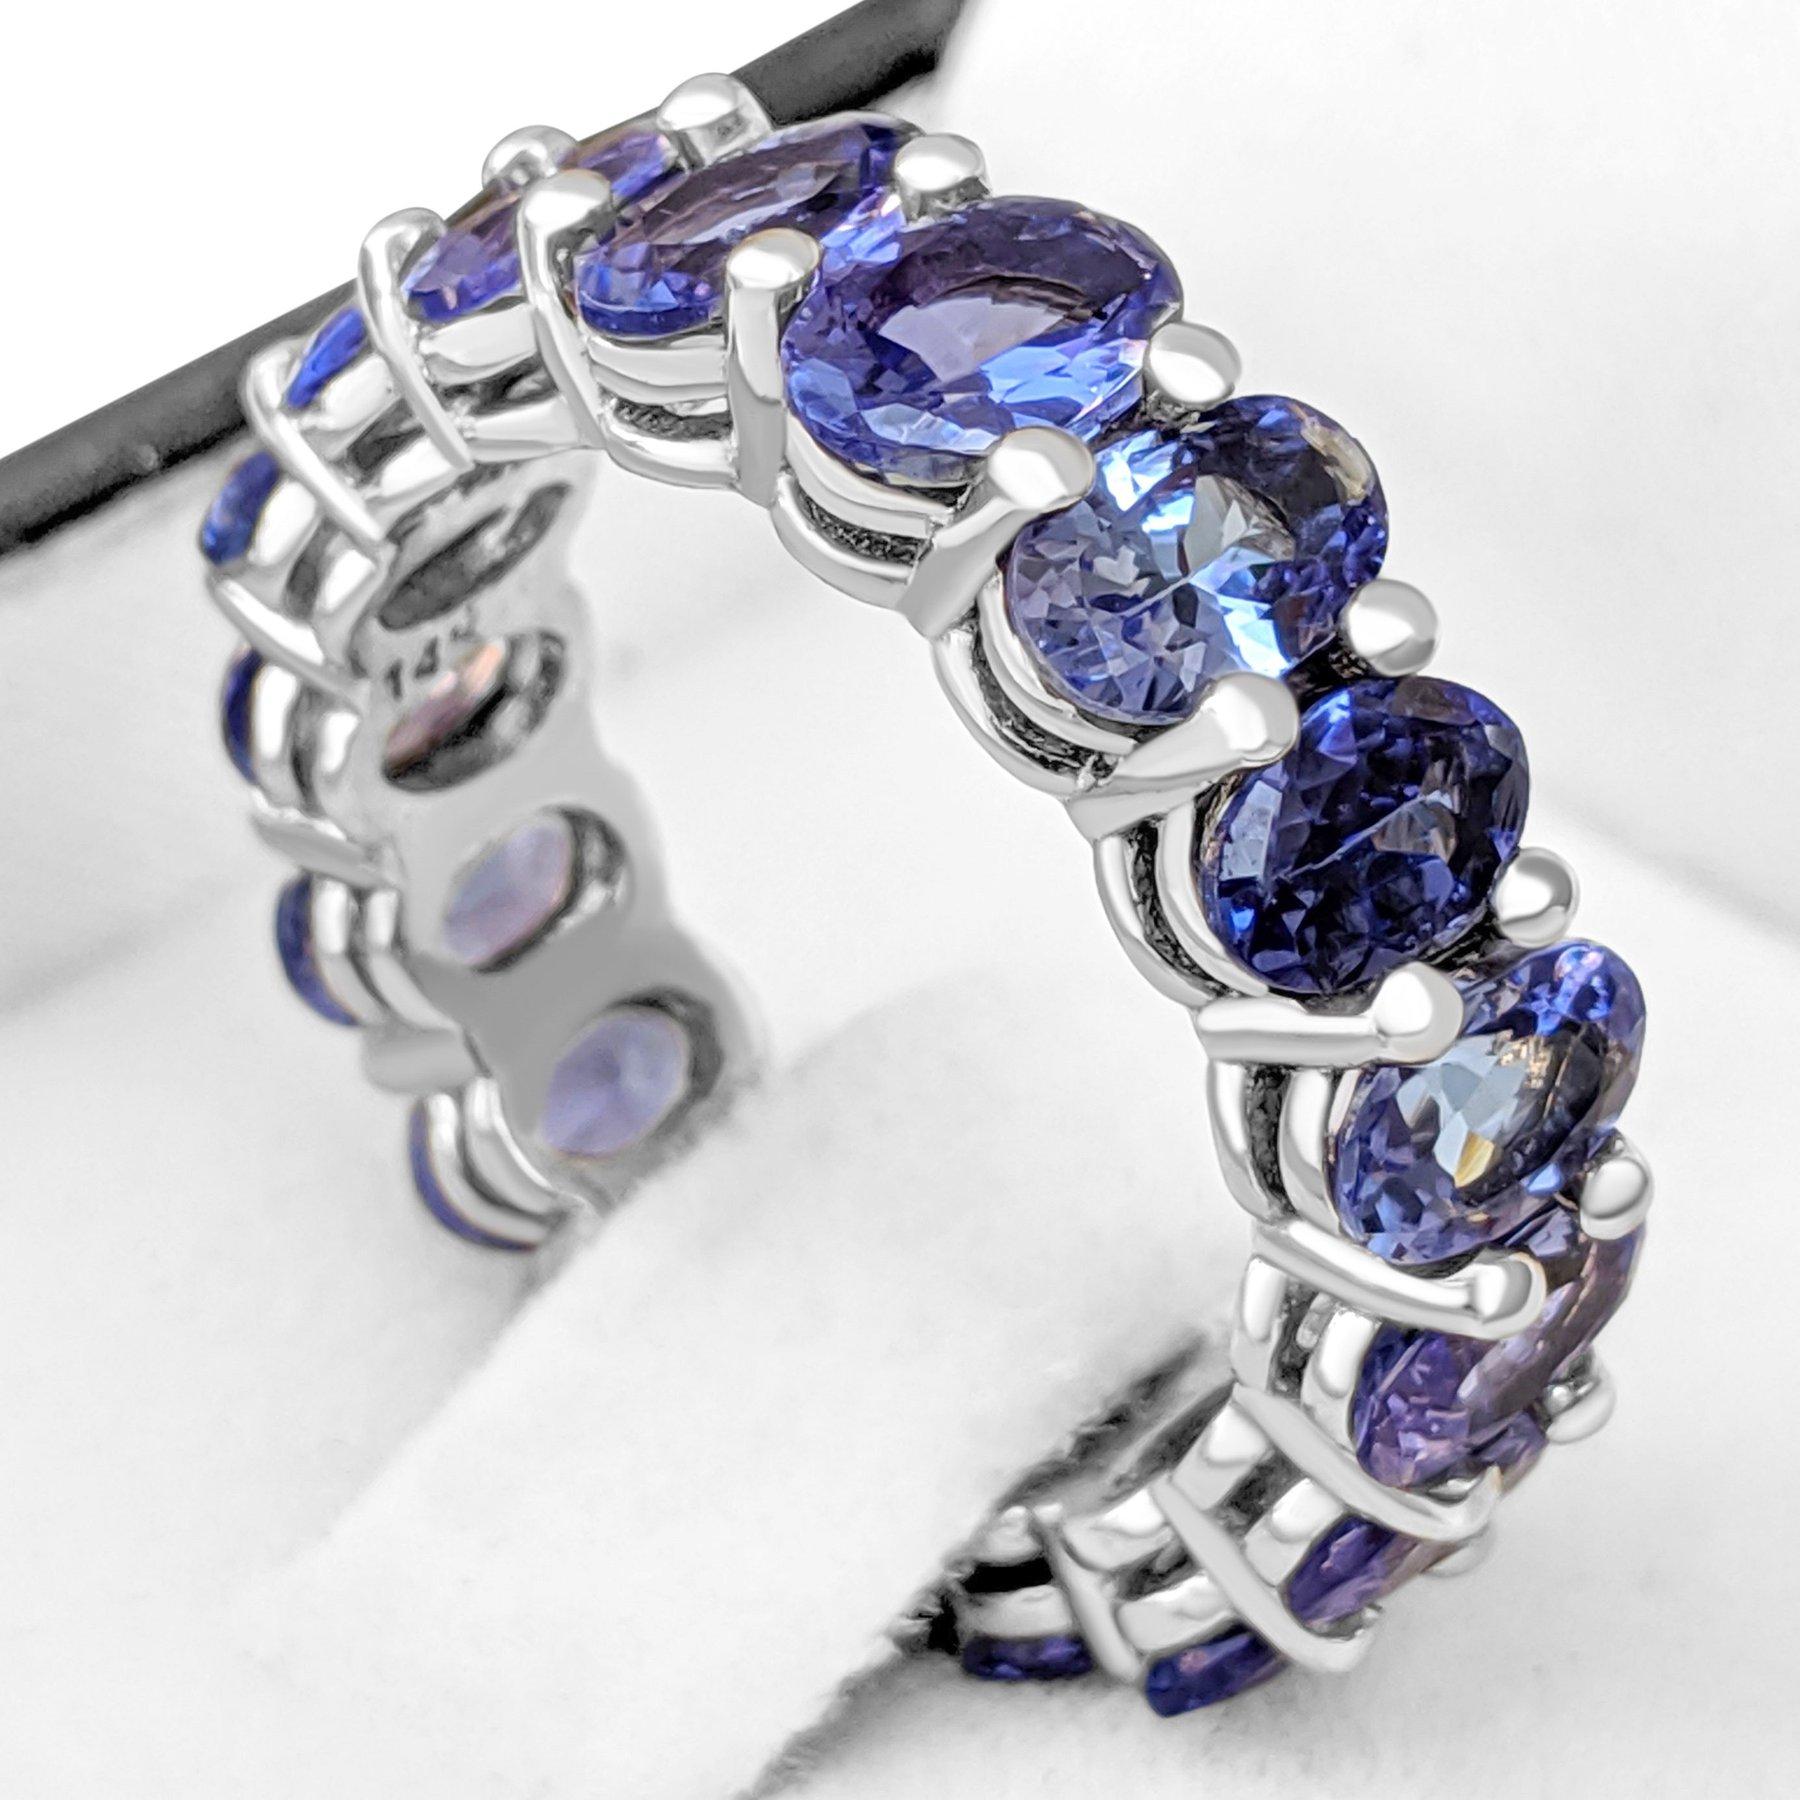 Taille ovale $1 NO RESERVE ! 8.22 Carat Tanzanite Eternity Band - 14 kt. Bague en or blanc